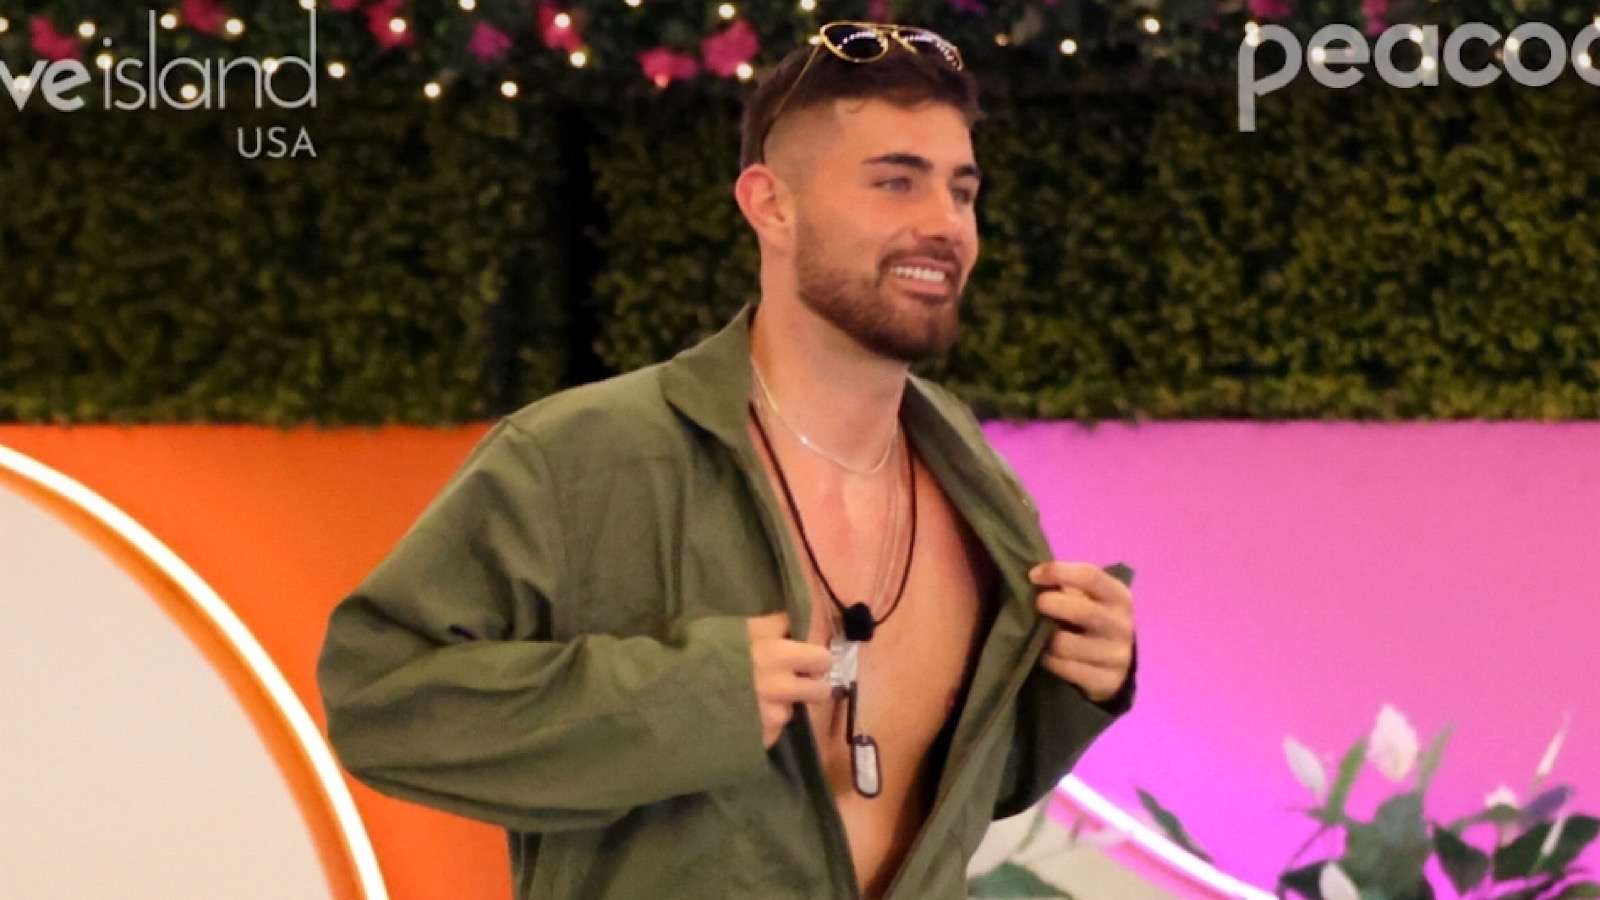 Scott entered the USA villa after being eliminated from the UK villa this Season.